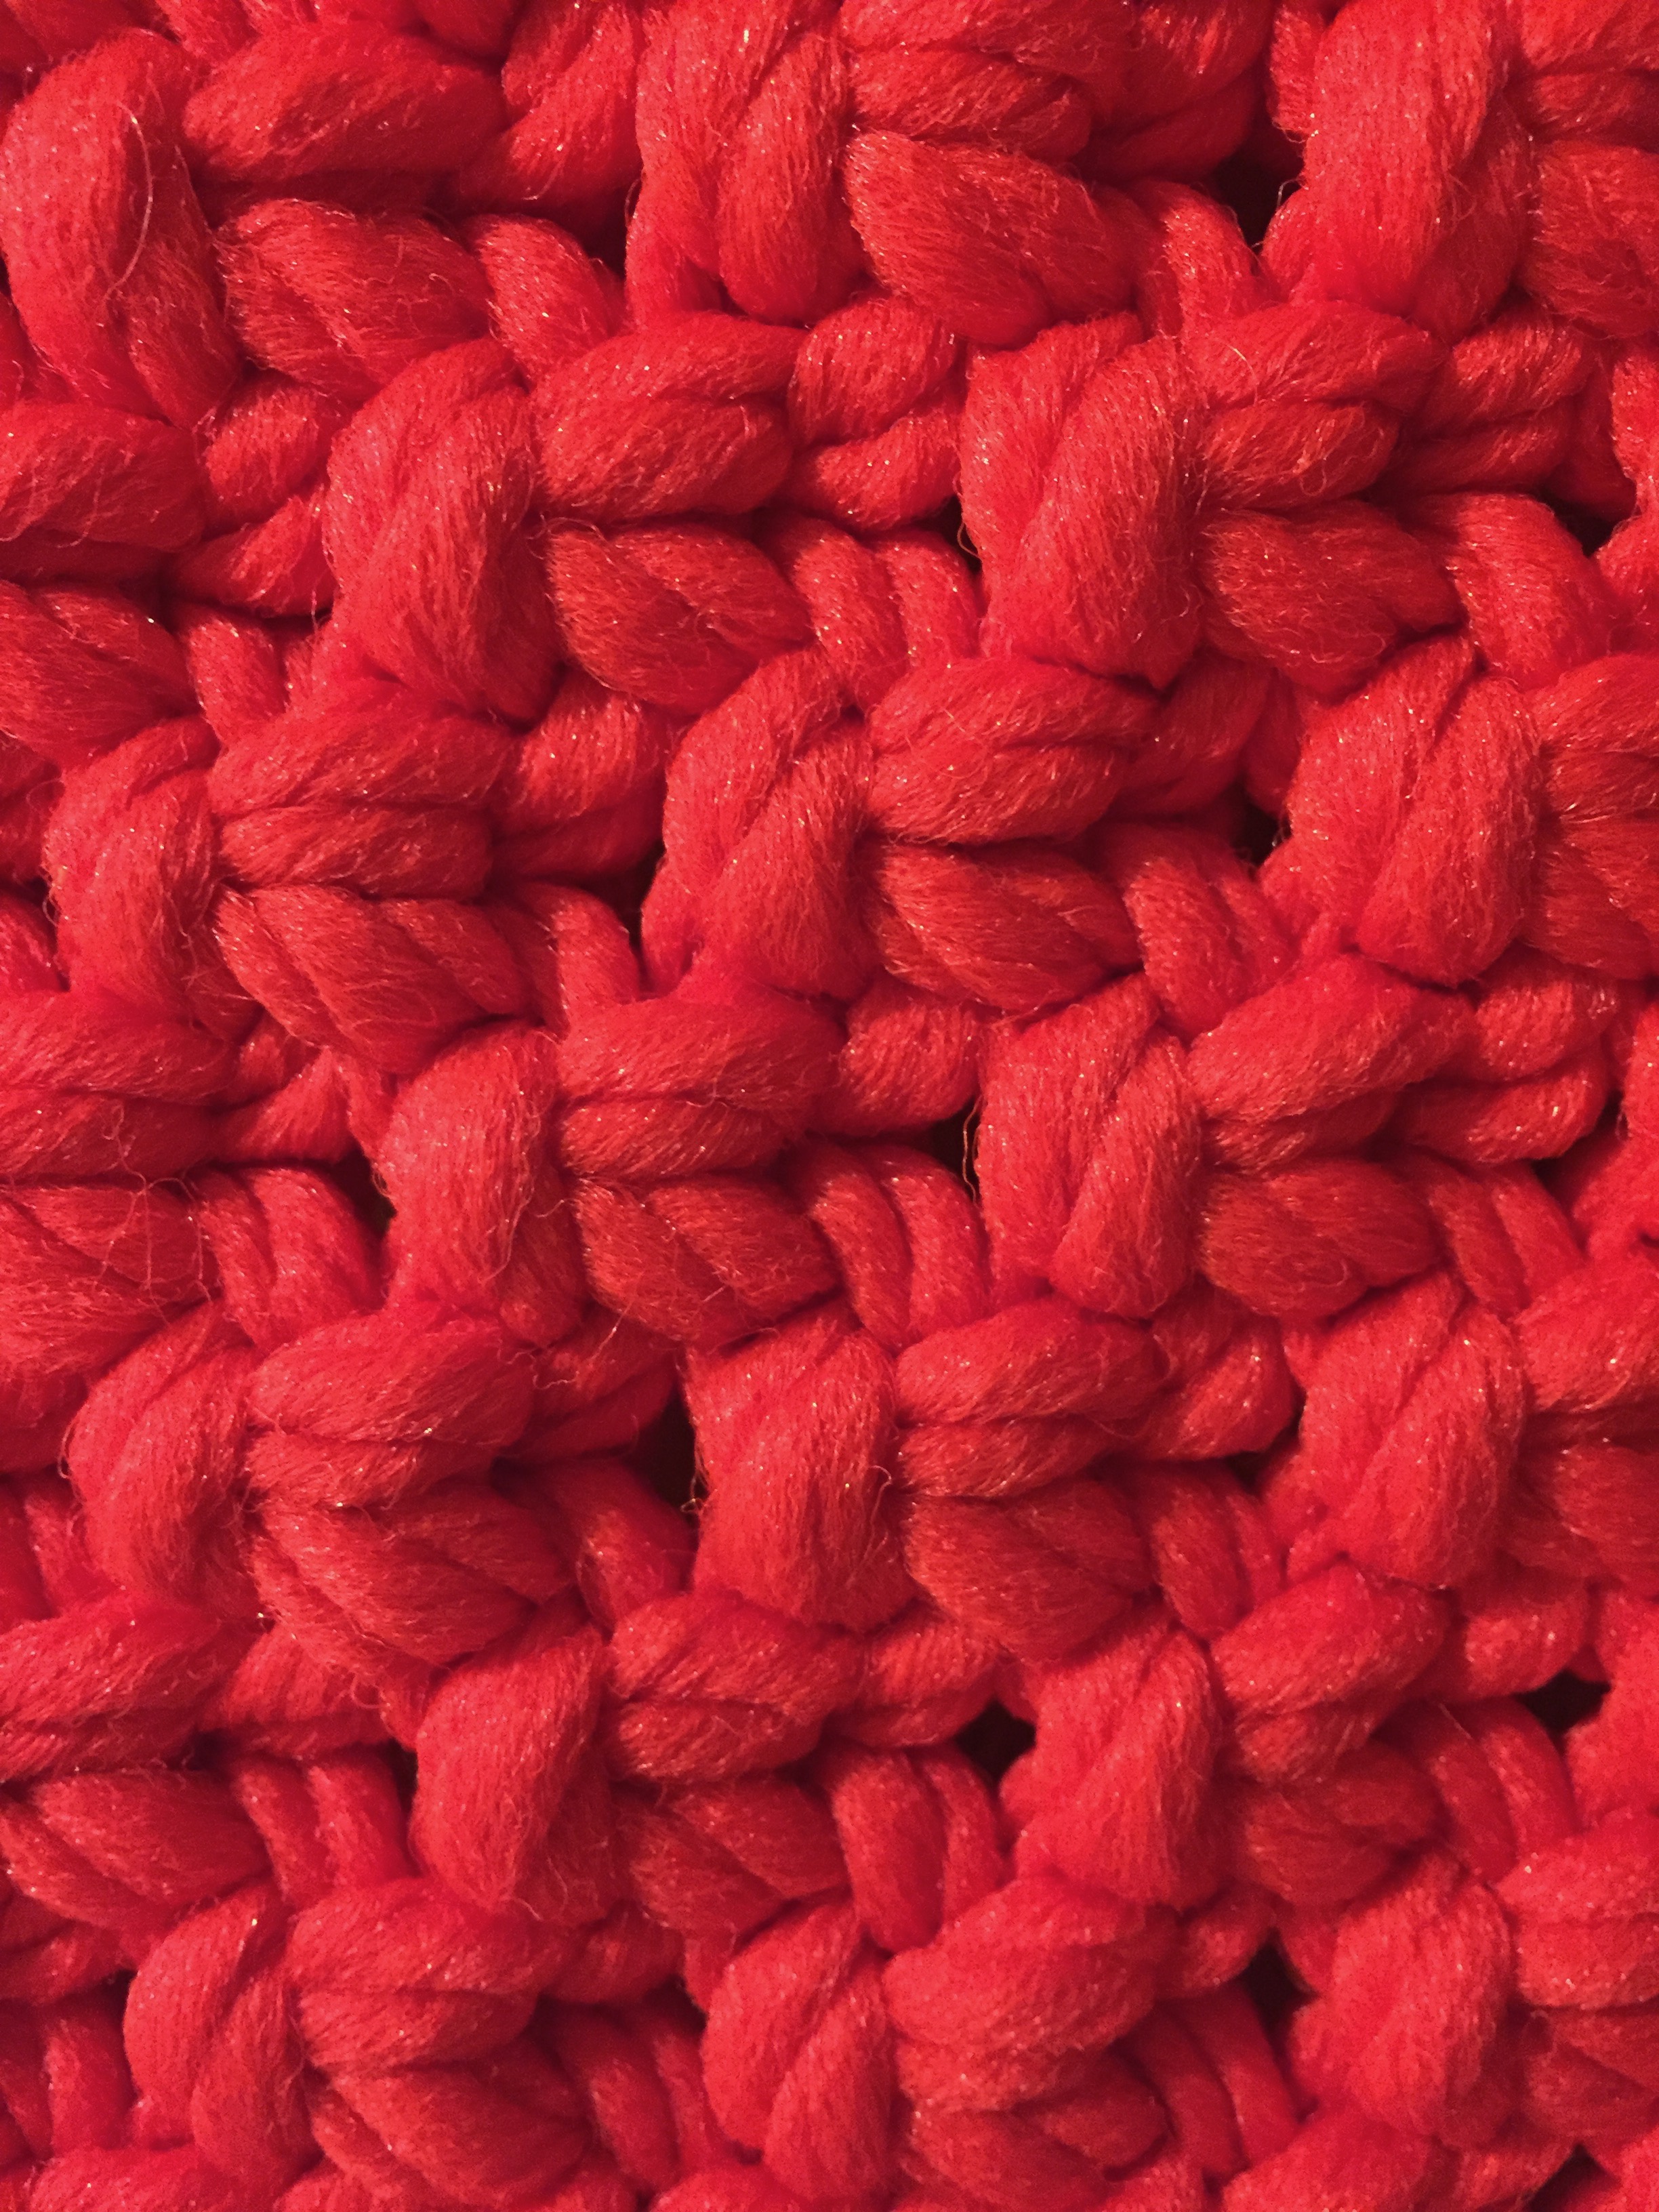 Bright red knit wool layers of texture